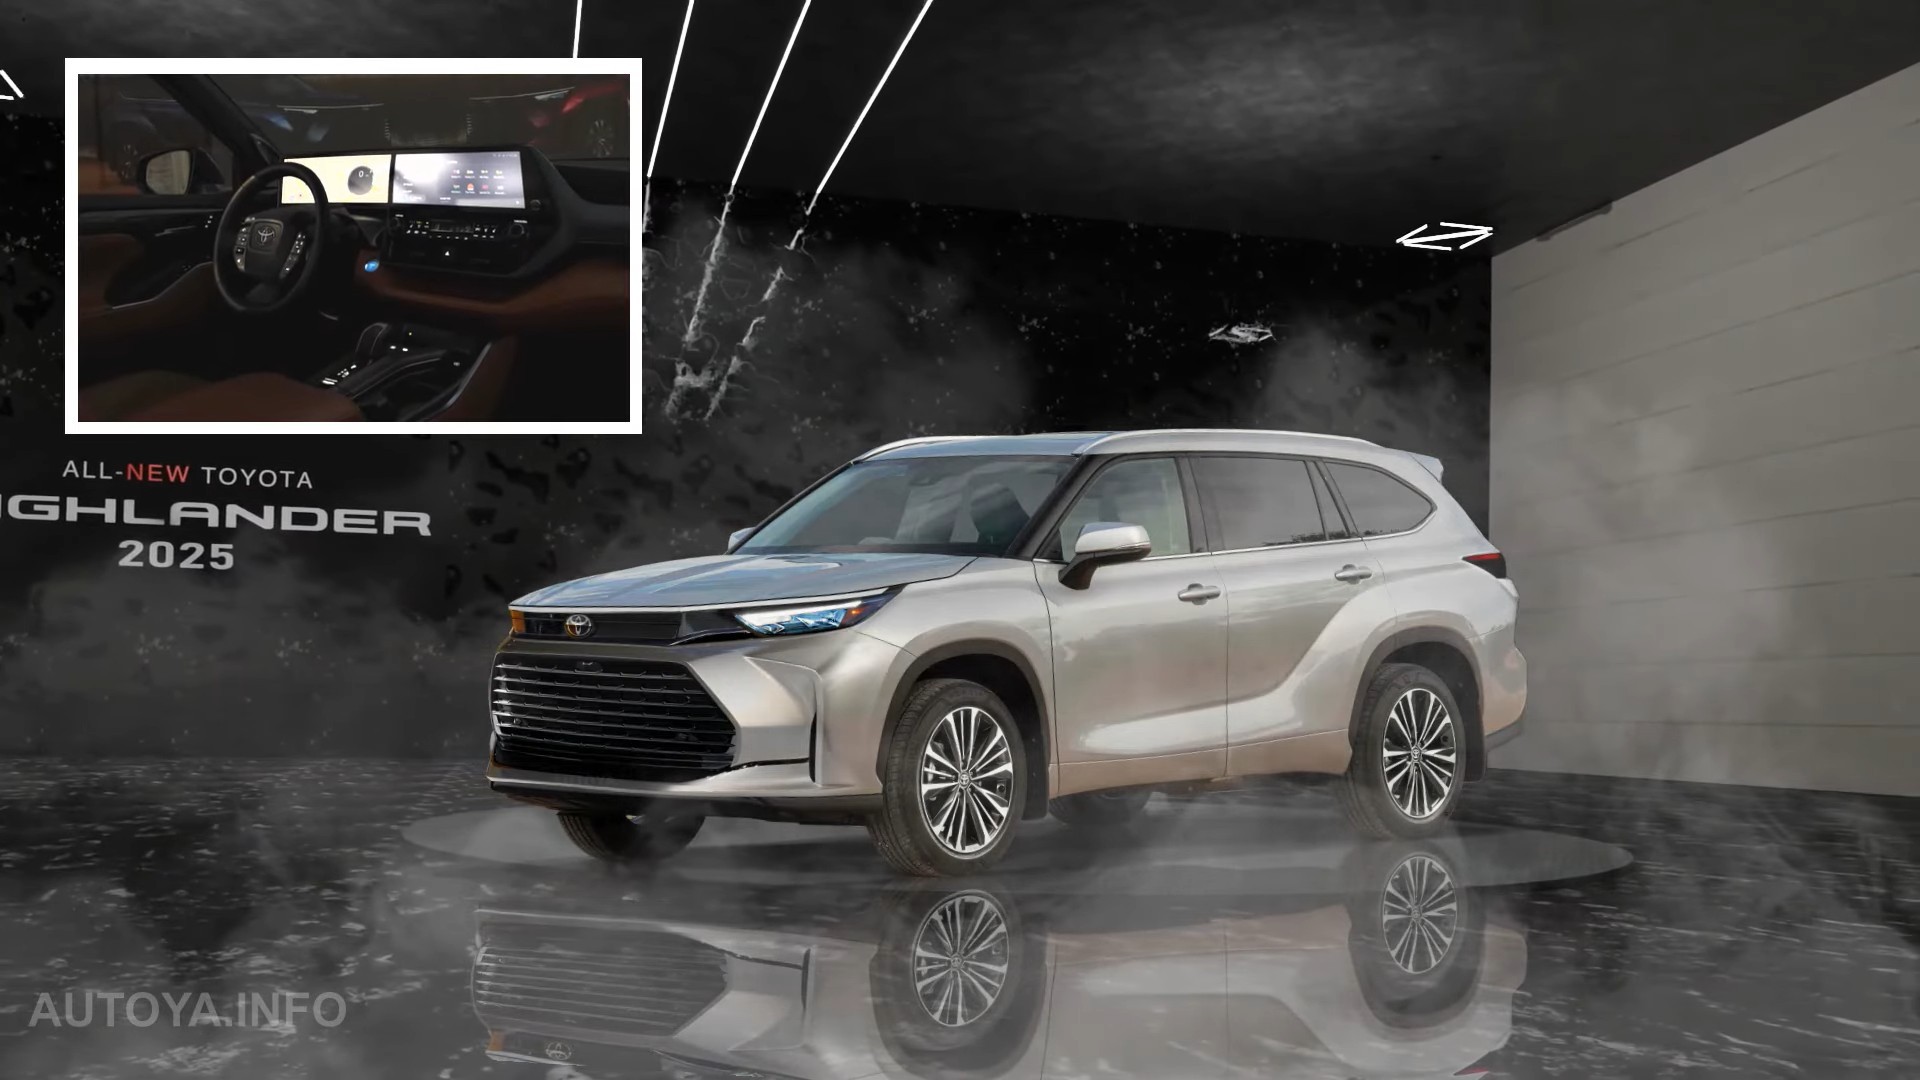 Toyota May Be Working On A New Highlander Prime SUV To Join Their